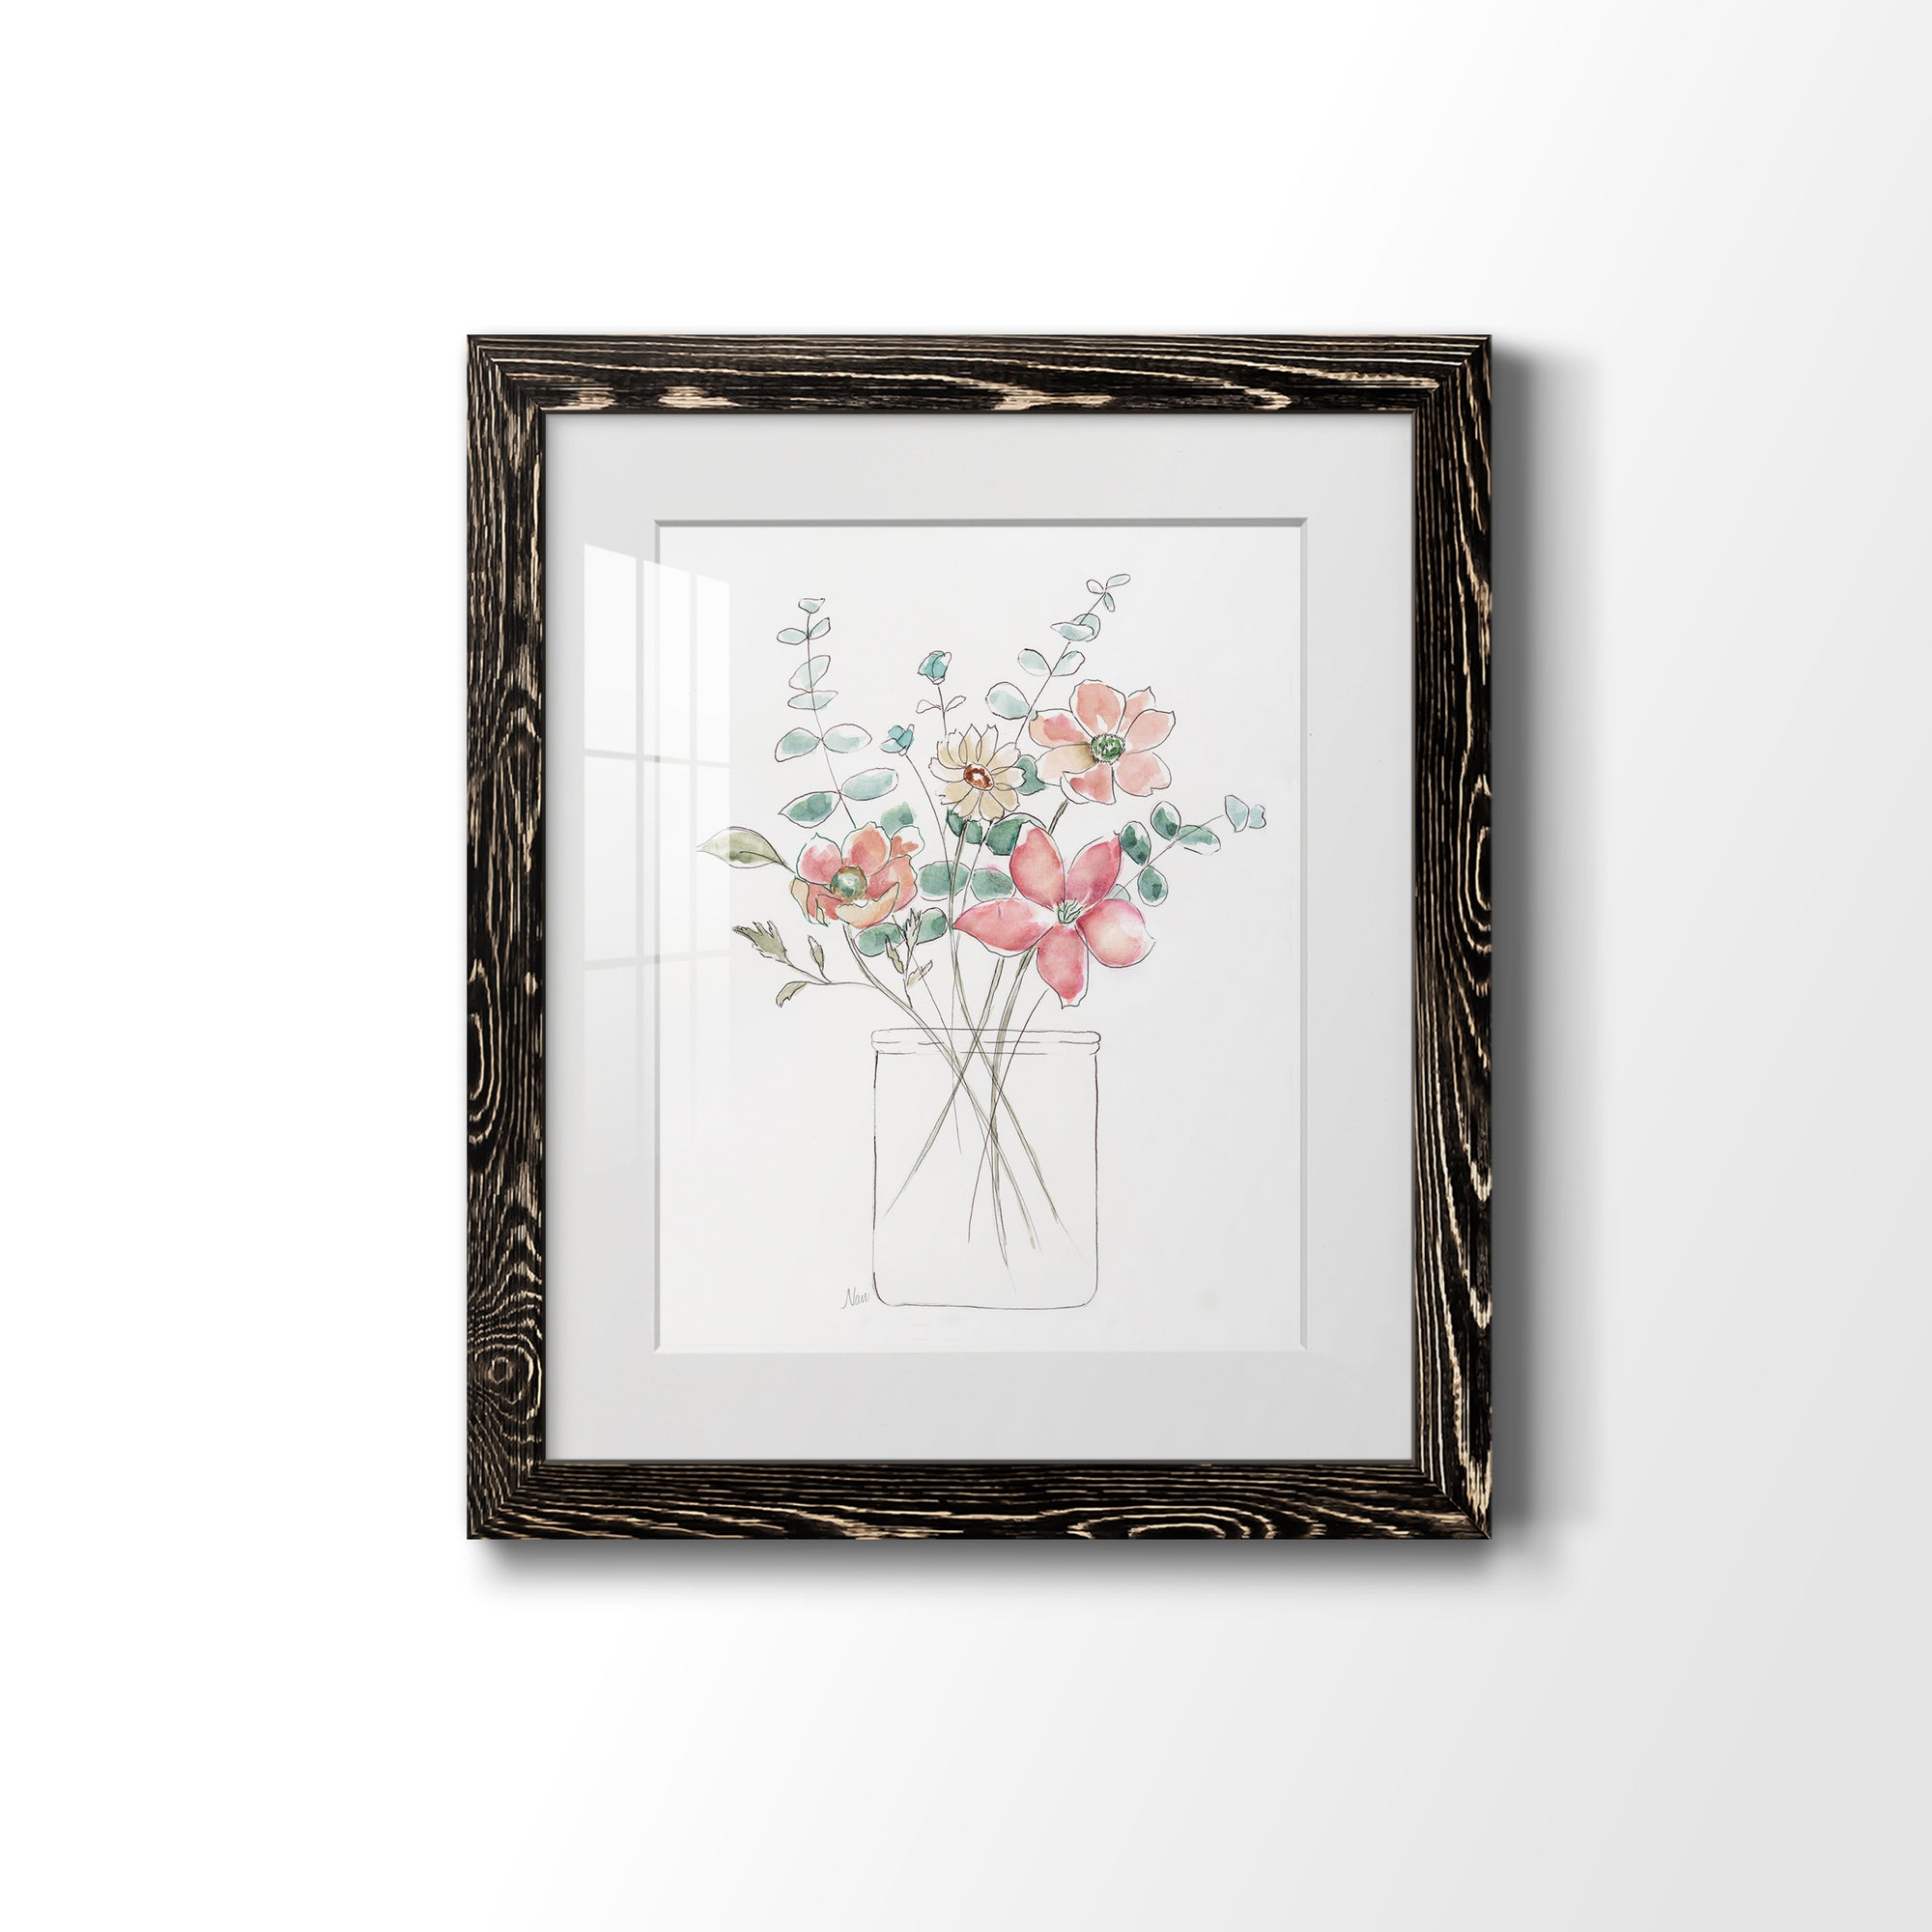 Whimsical Wildflowers I - Premium Framed Print - Distressed Barnwood Frame - Ready to Hang